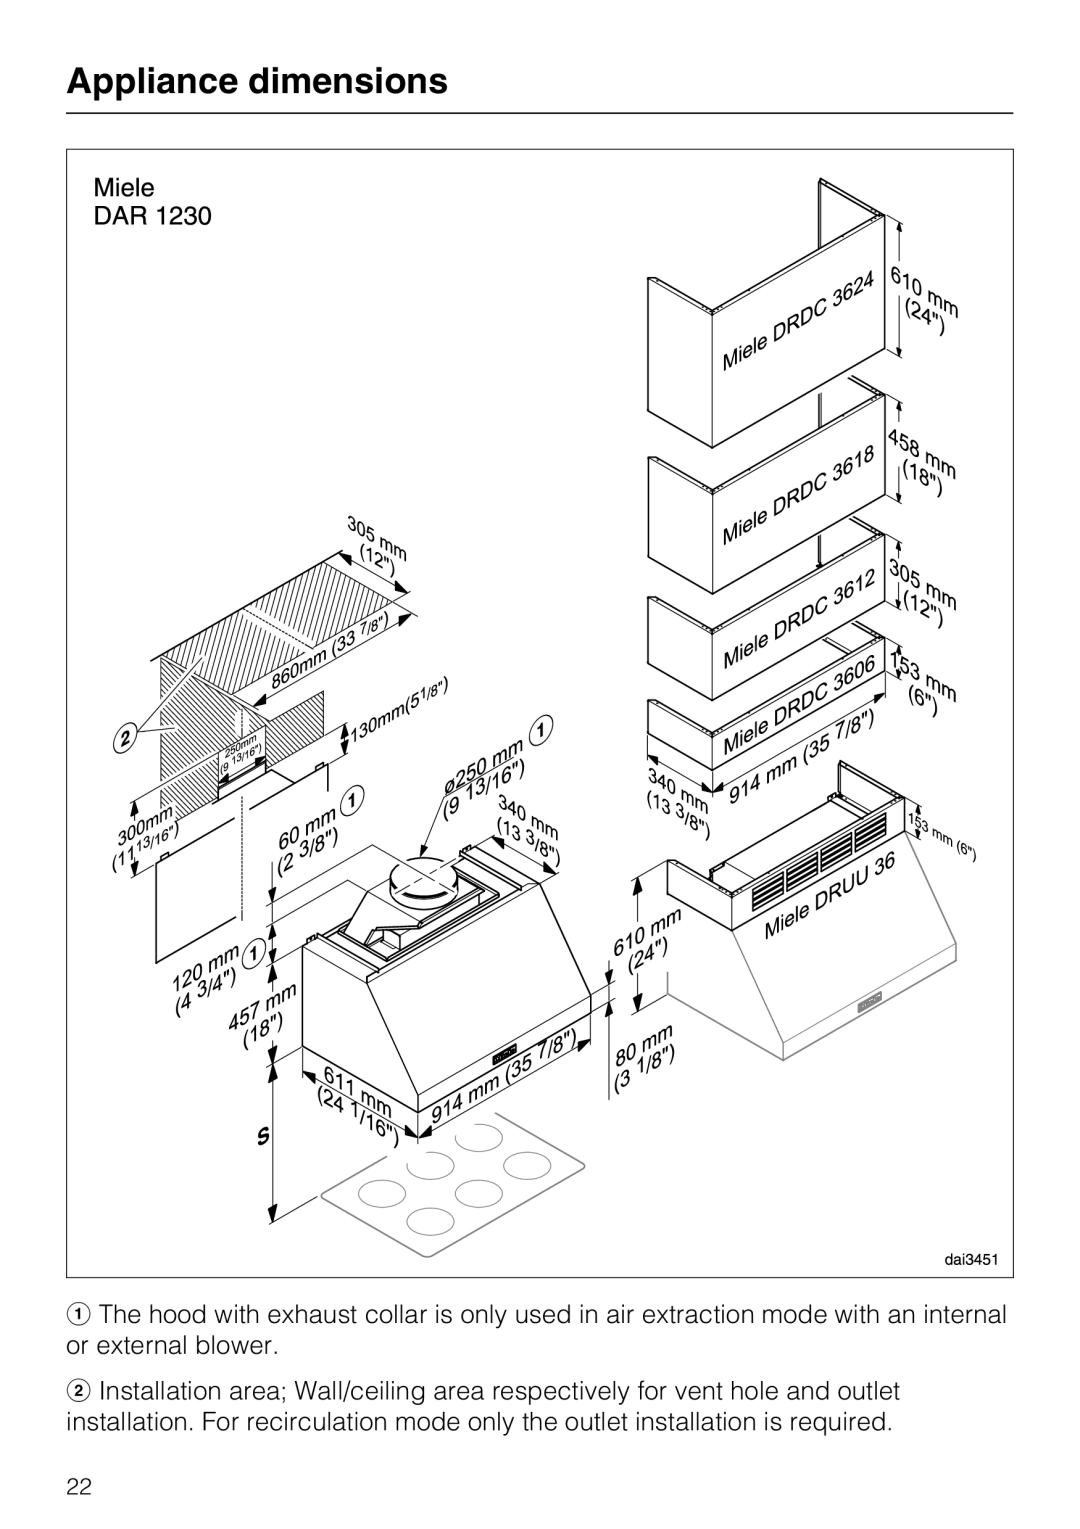 Miele 09 824 260 installation instructions Appliance dimensions 